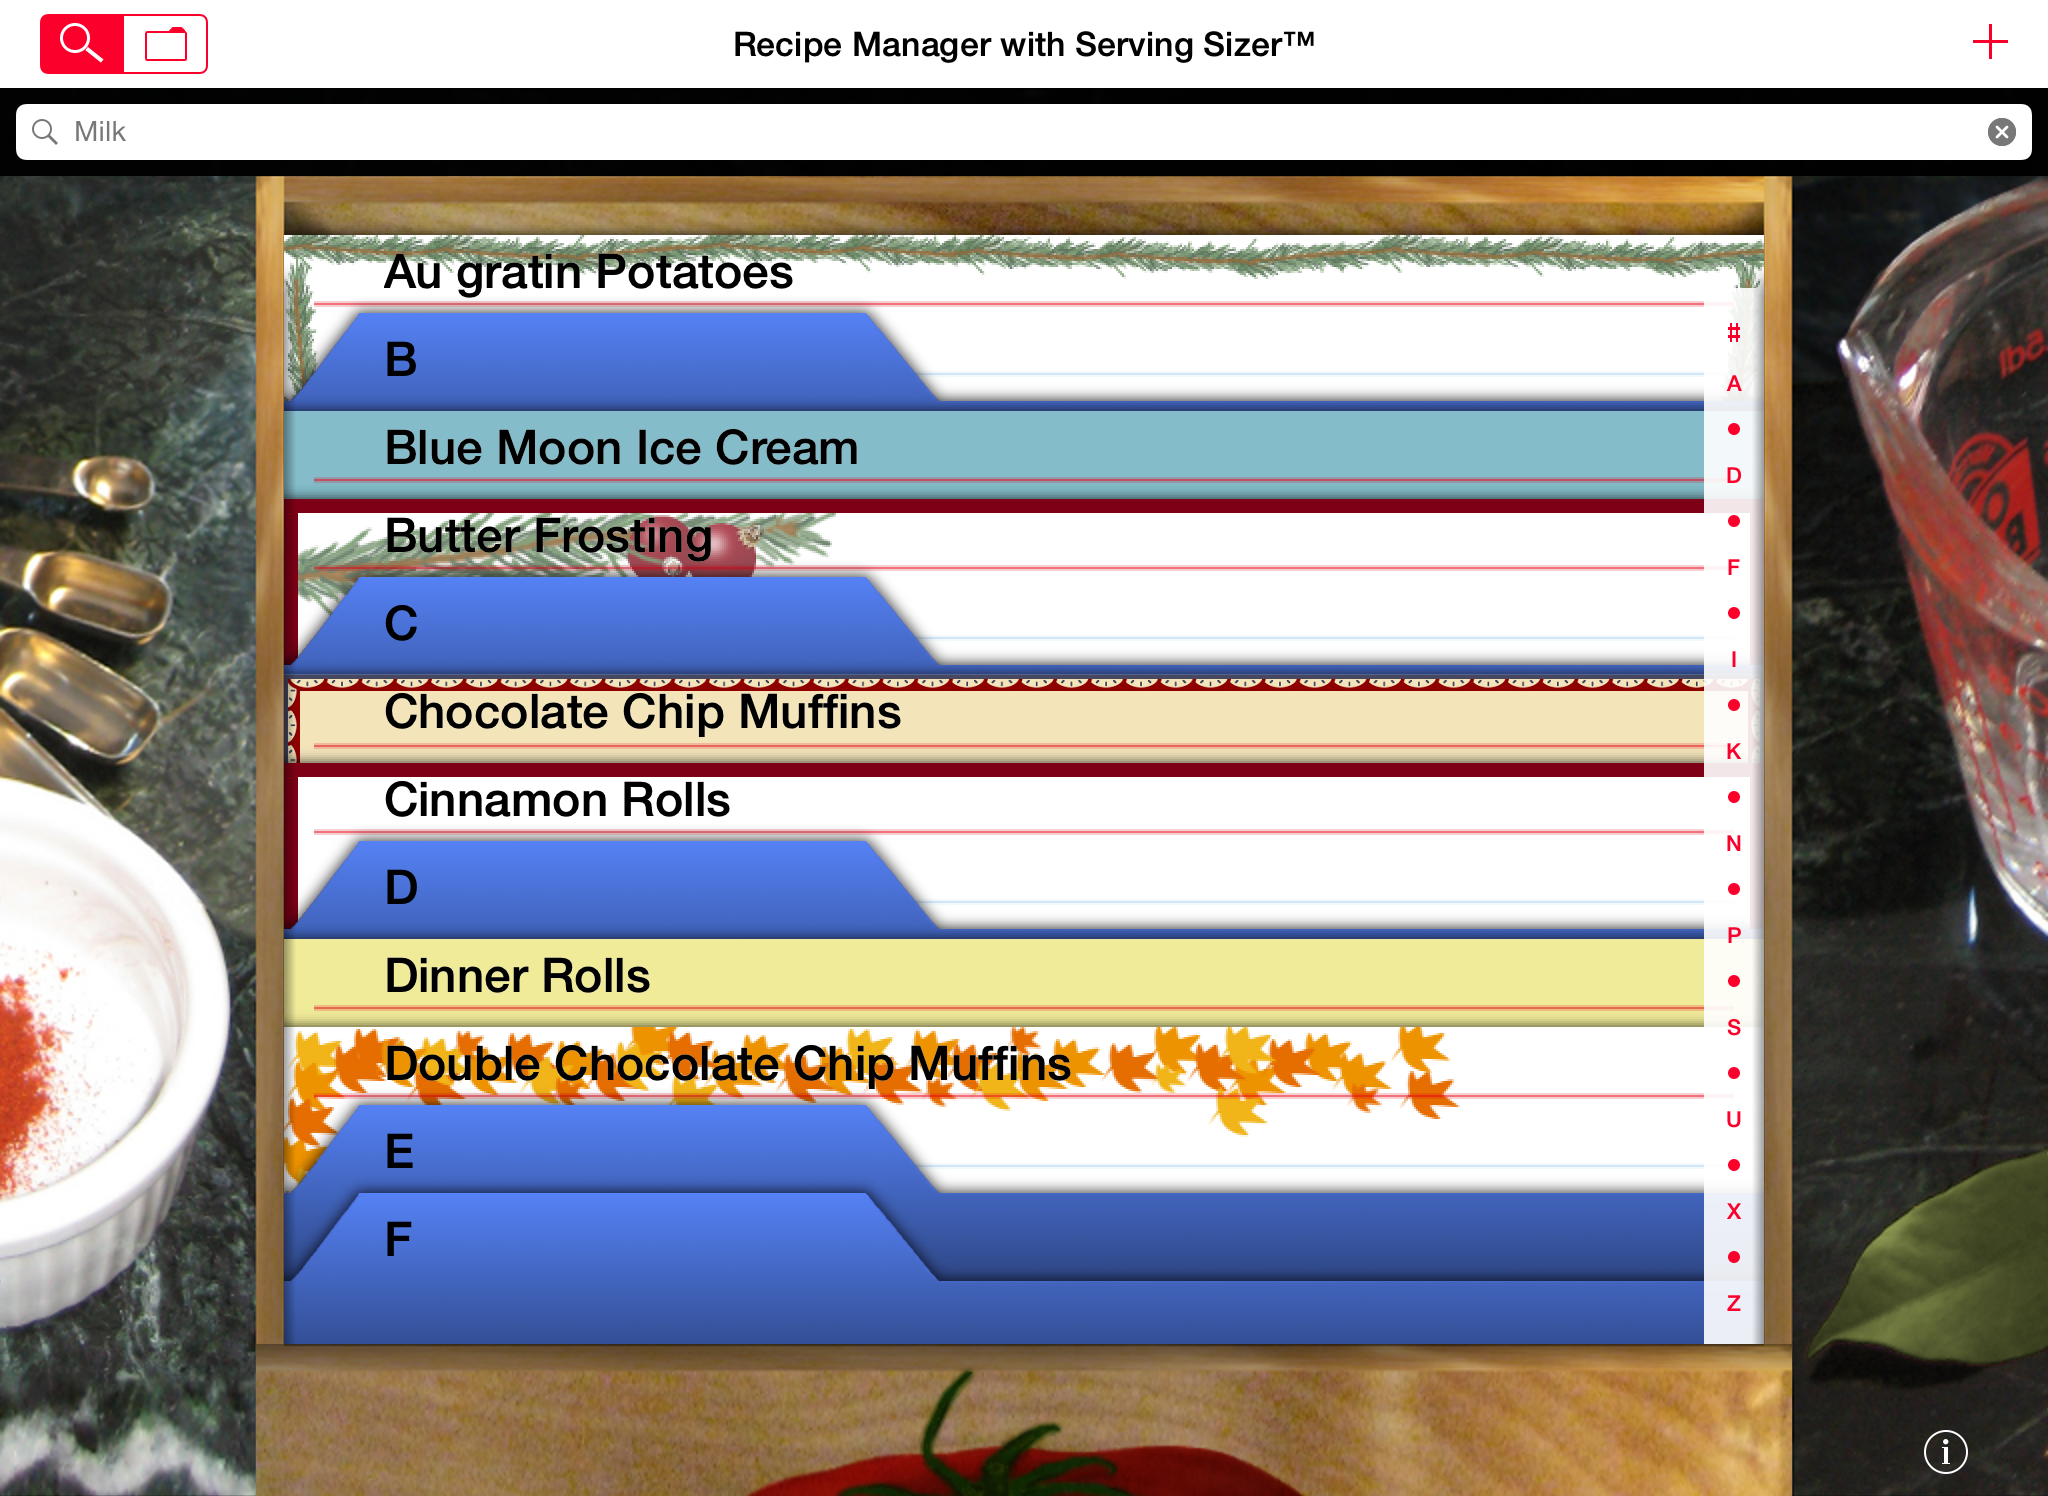 Serving Sizer recipe cards search results